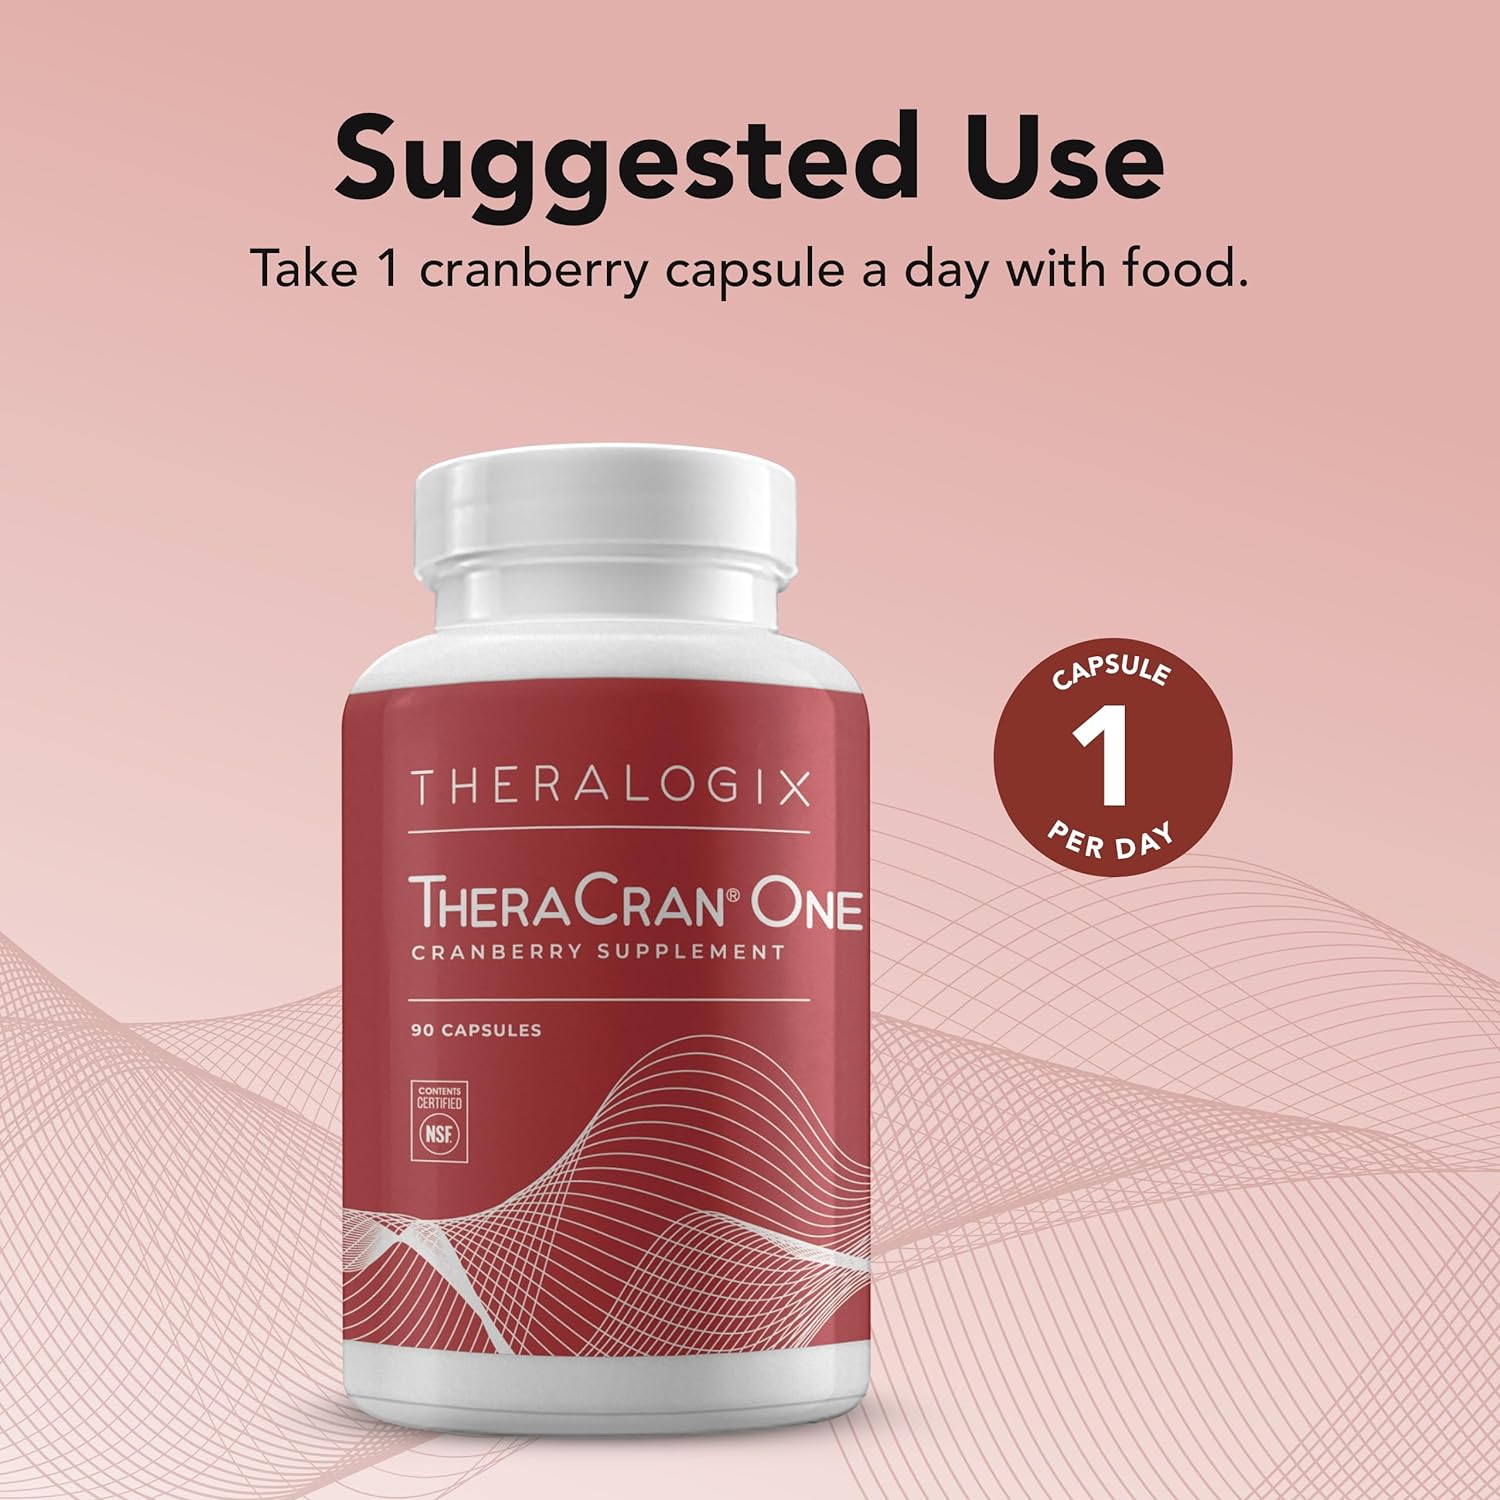 Theralogix TheraCran One Cranberry Capsules - 90-Day Supply - Cranberry Supplement for Men & Women - Cranberry Pills to Support Urinary Tract Health* - 36mg PACs per Capsule - NSF Certified - 90 Caps : Health & Household